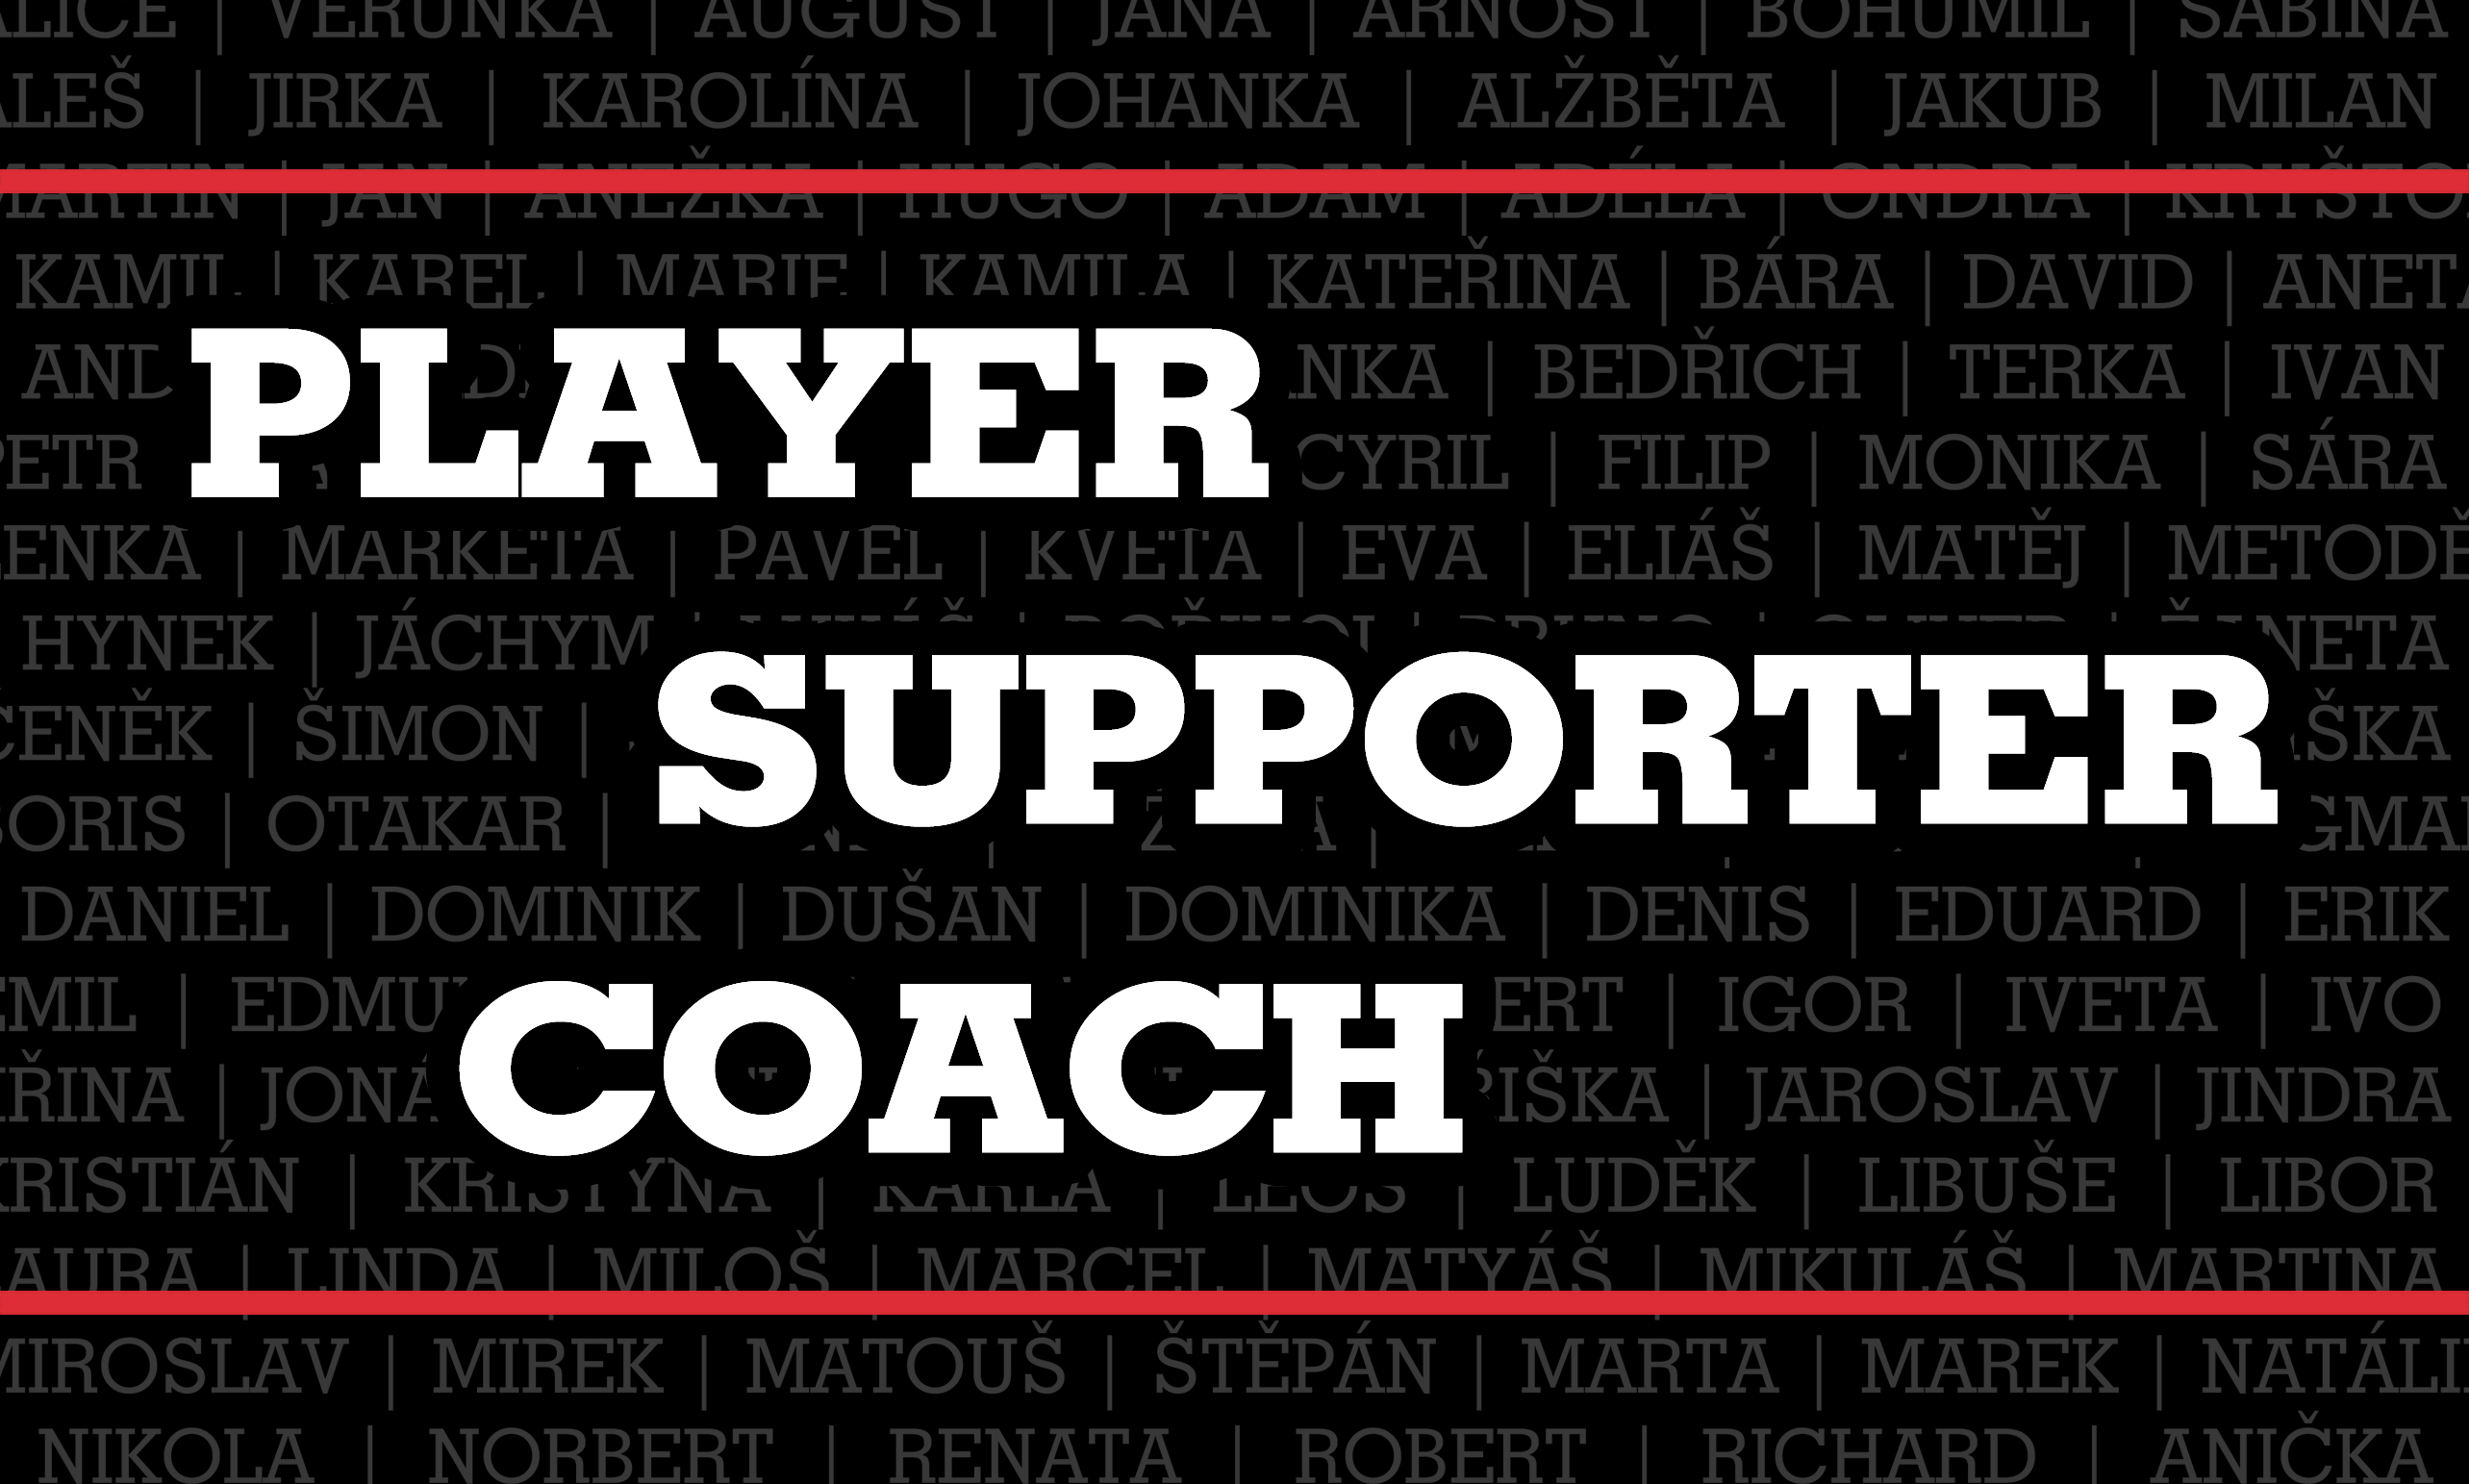 Kampa PLAYER | SUPPORTER | COACH